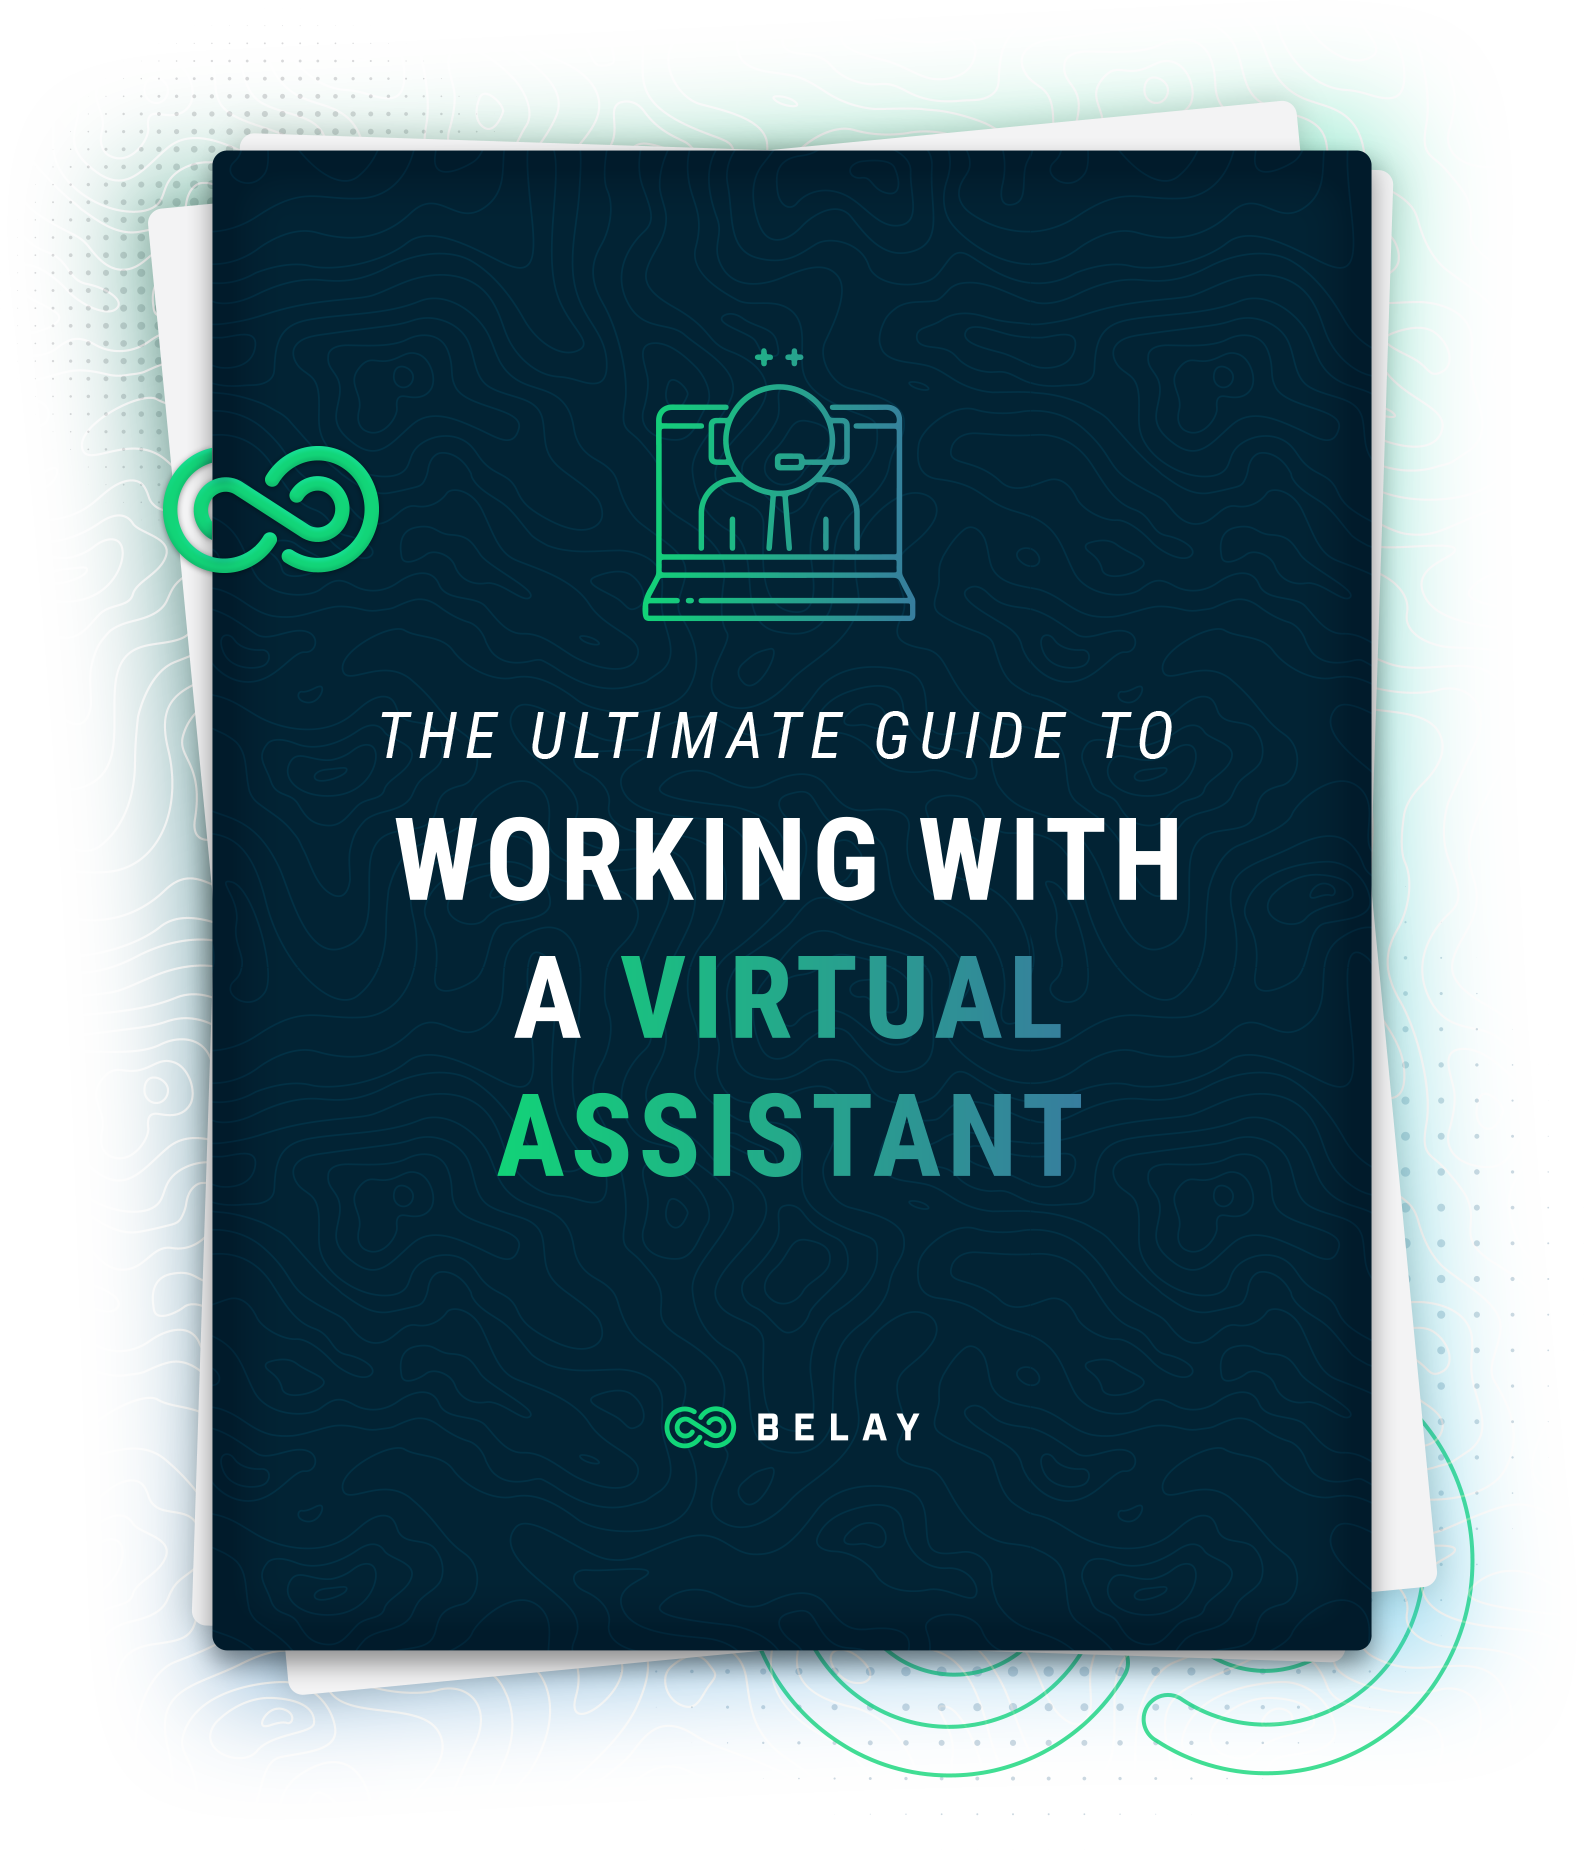 The Ultimate Guide to Working with a Virtual Assistant